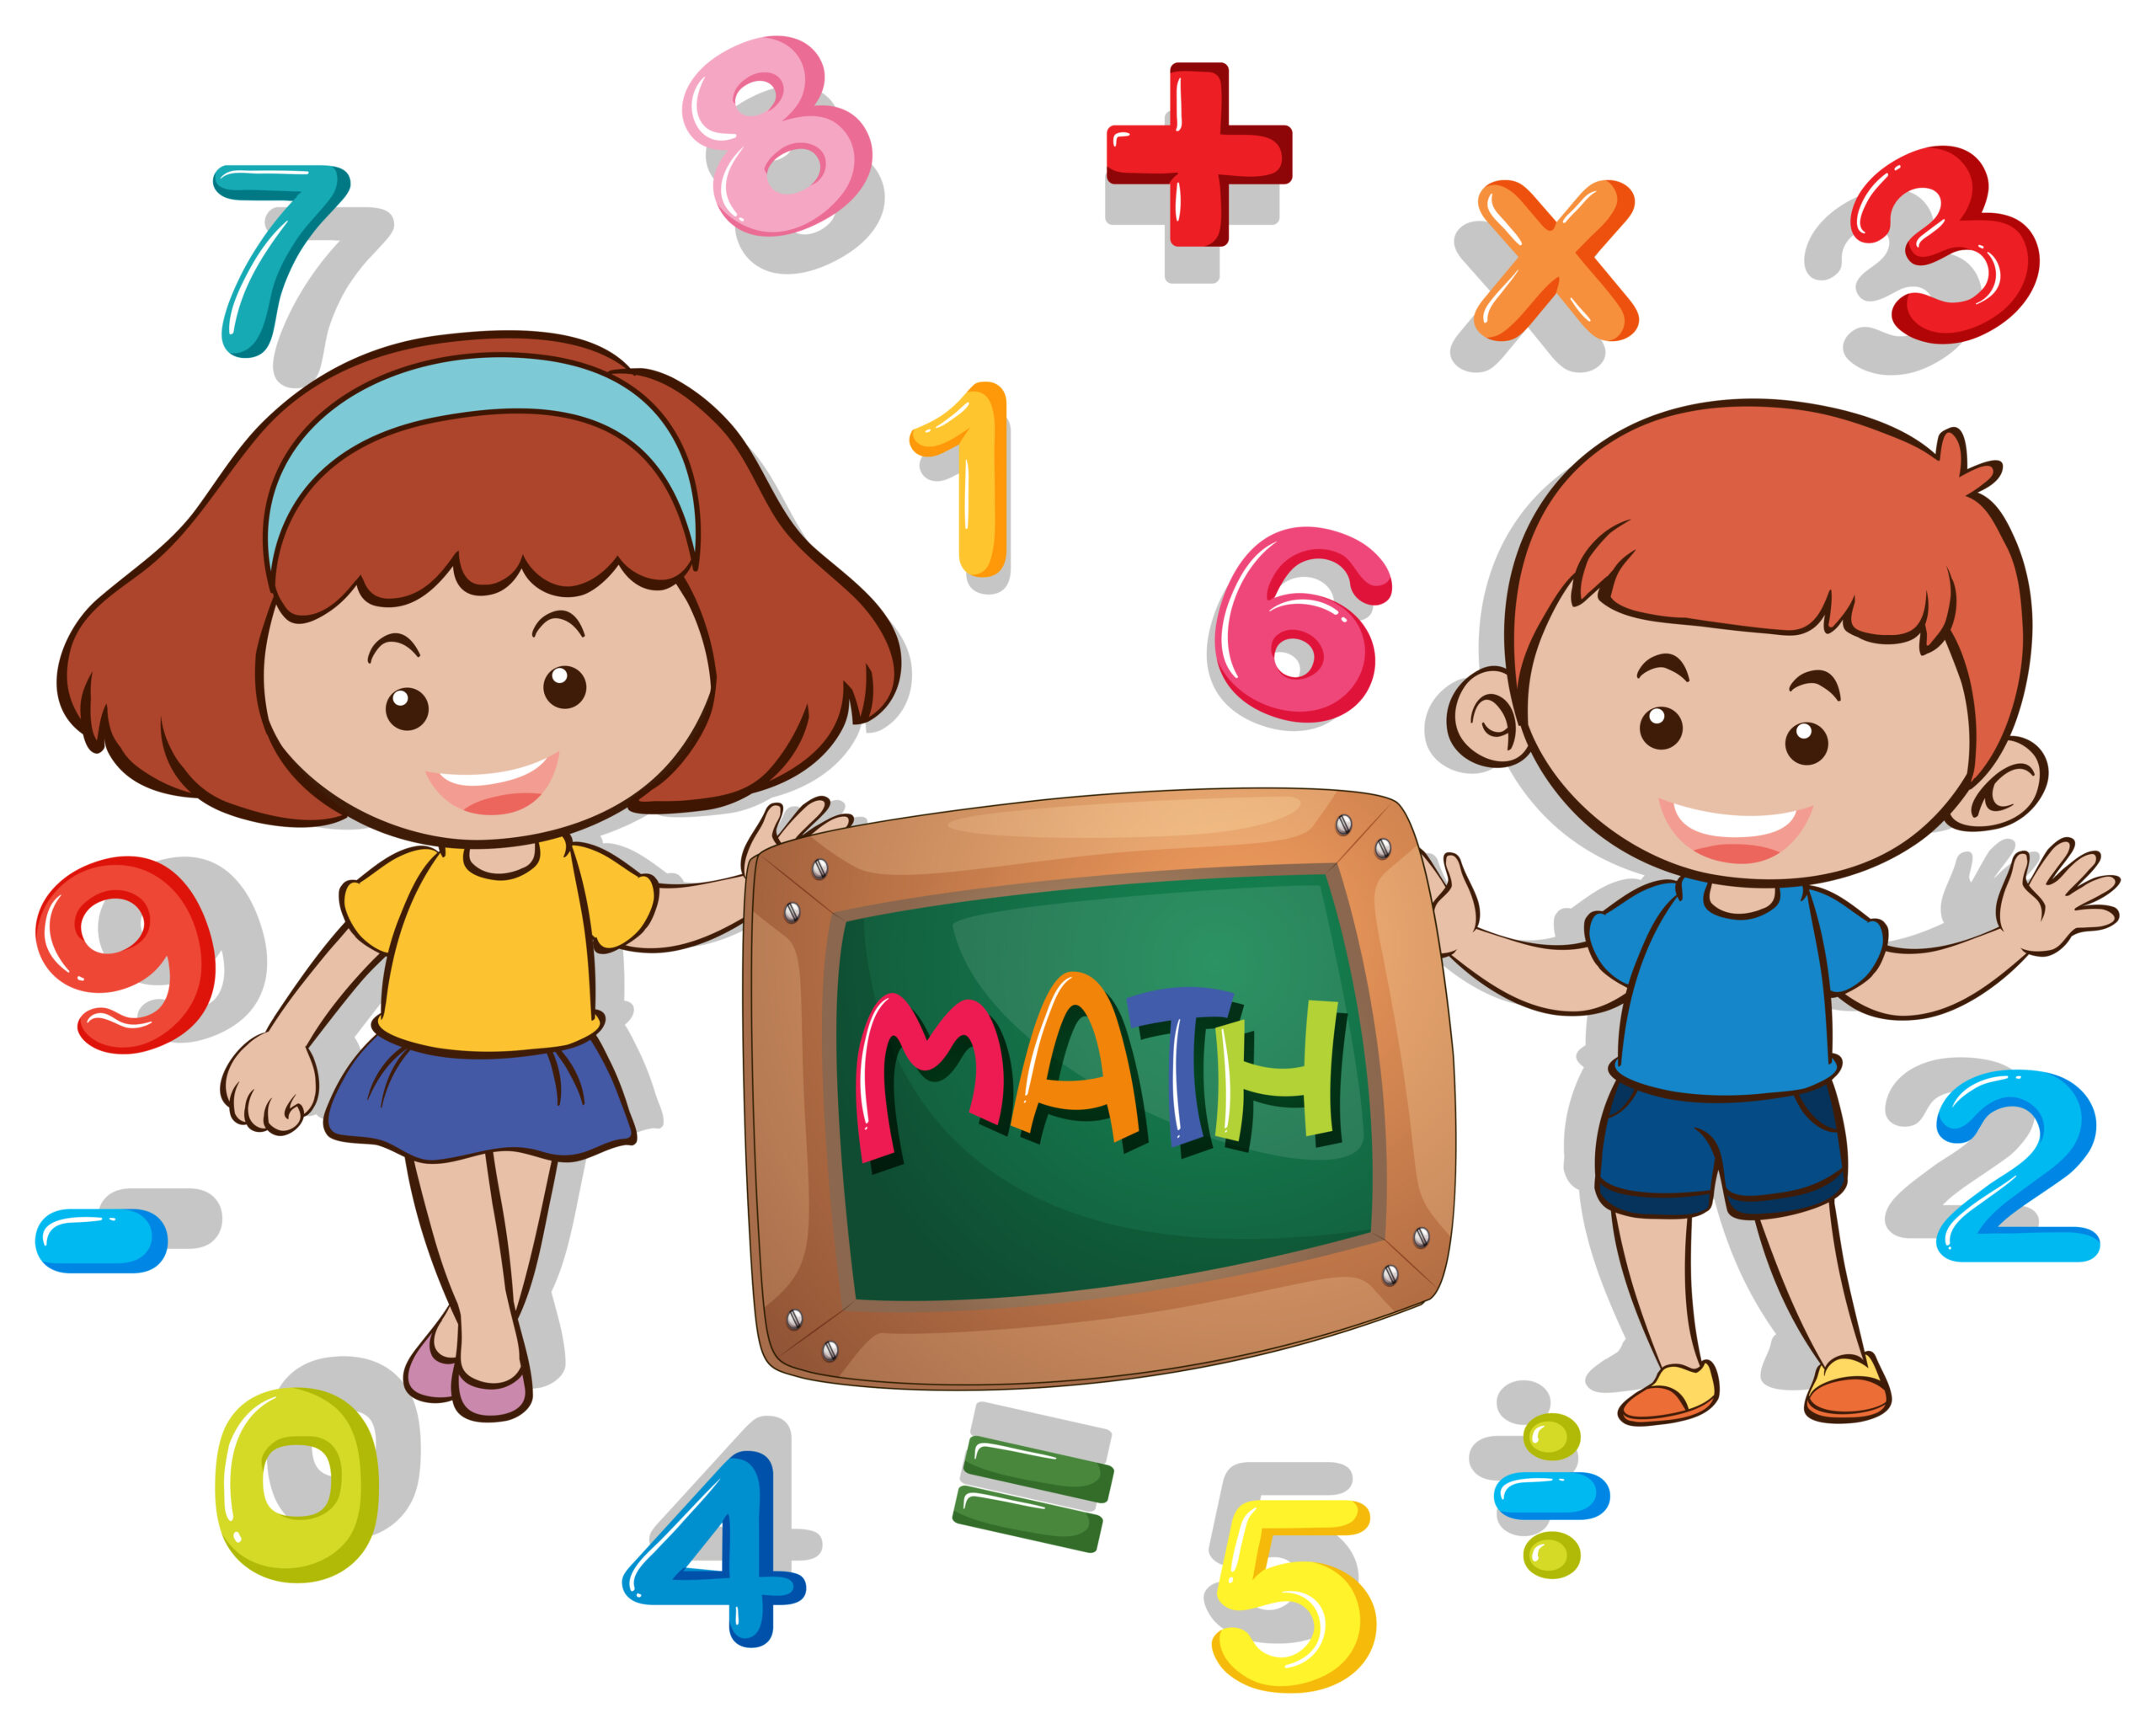 Boy and girl with many numbers